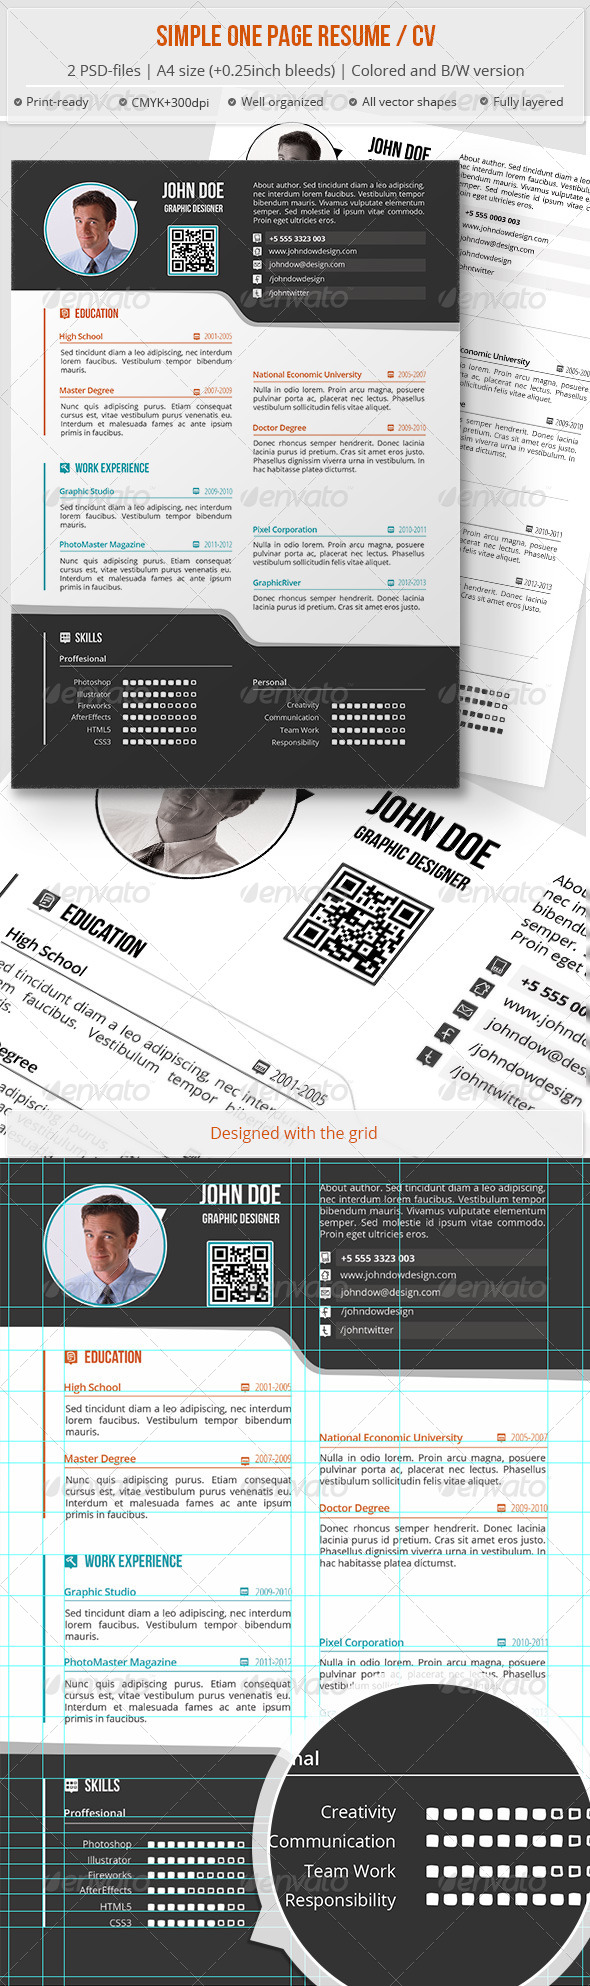 Simple One Page Resume / CV